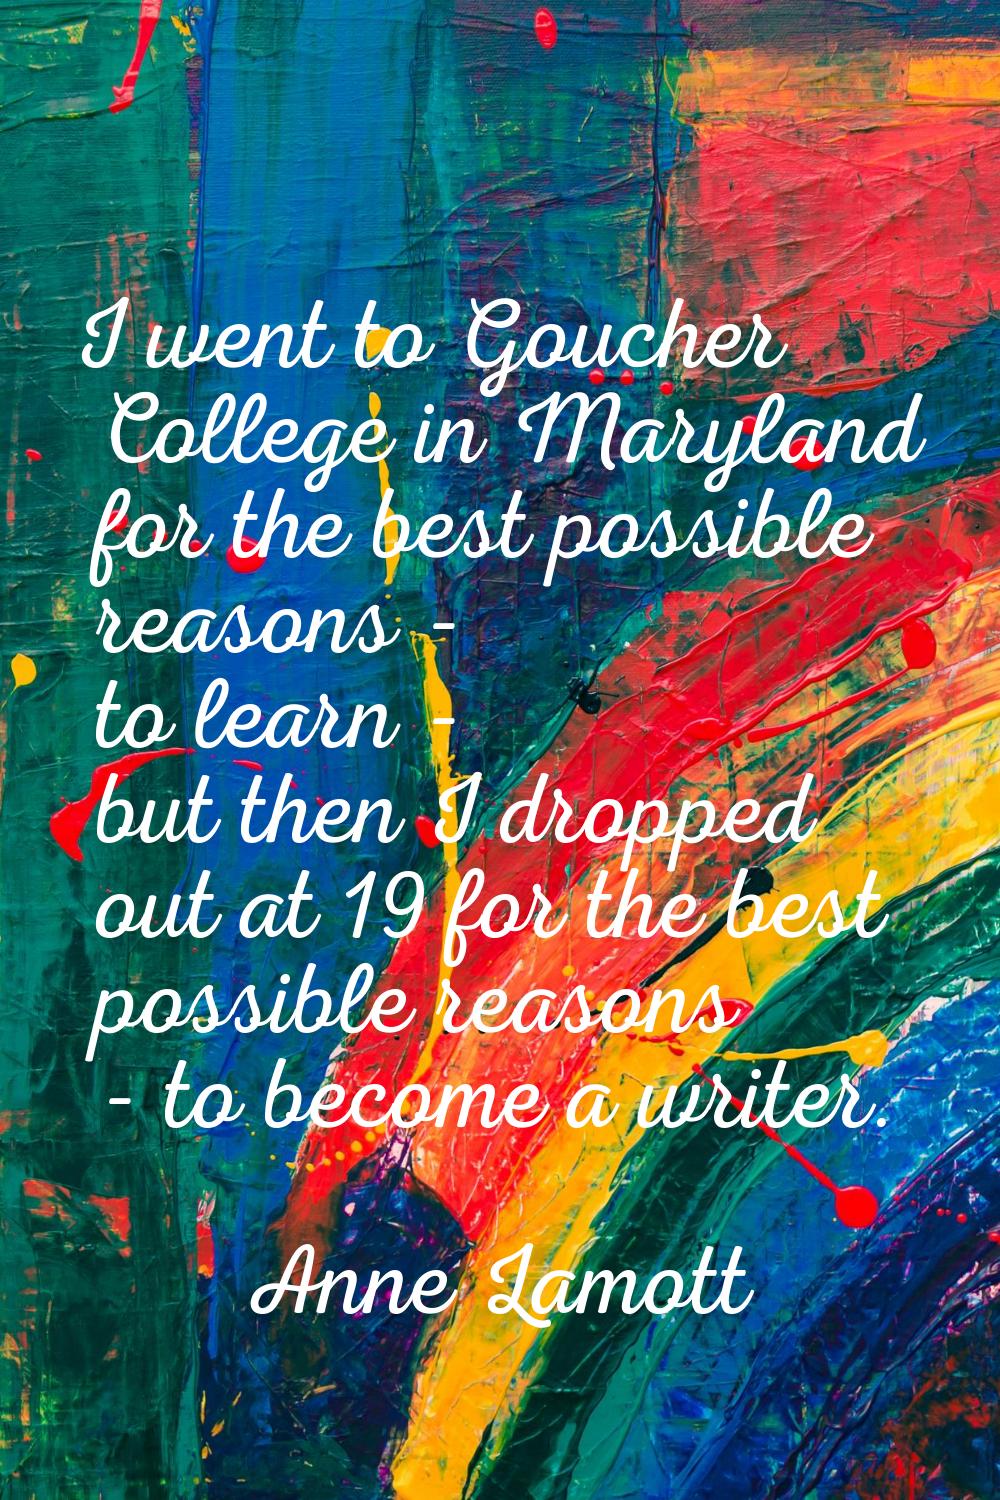 I went to Goucher College in Maryland for the best possible reasons - to learn - but then I dropped